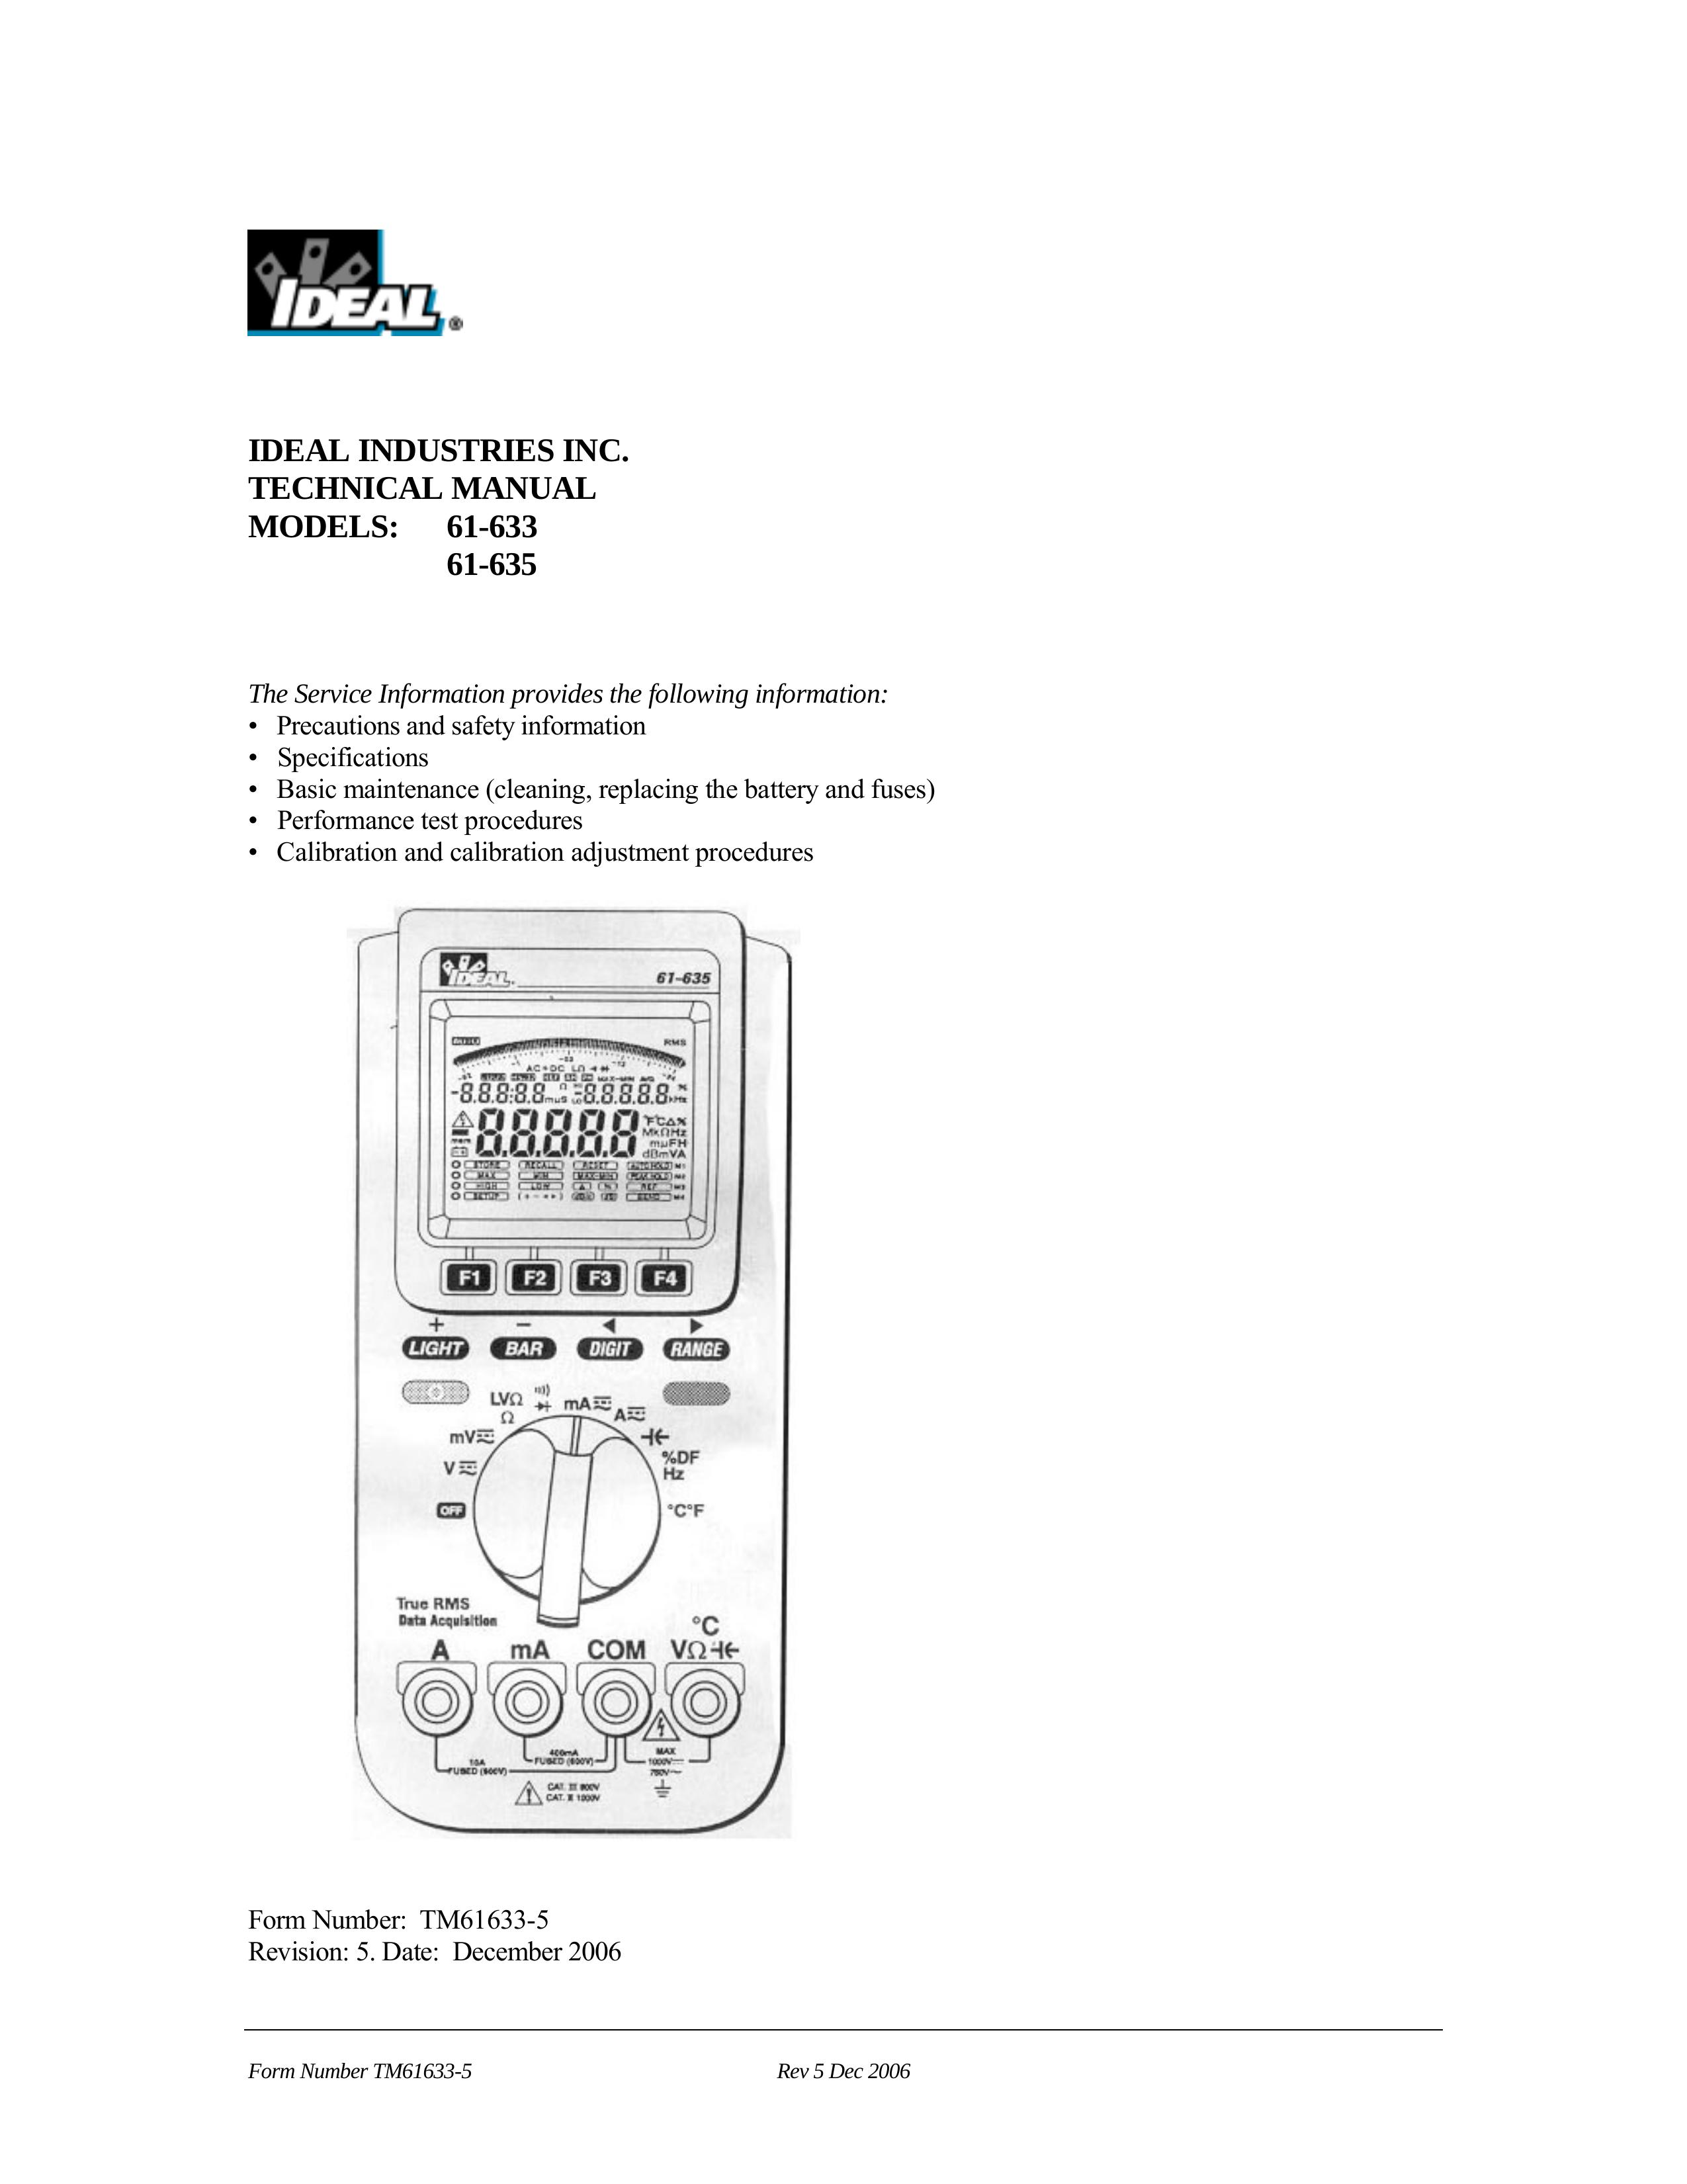 IDEAL INDUSTRIES Meter Thermometer User Manual